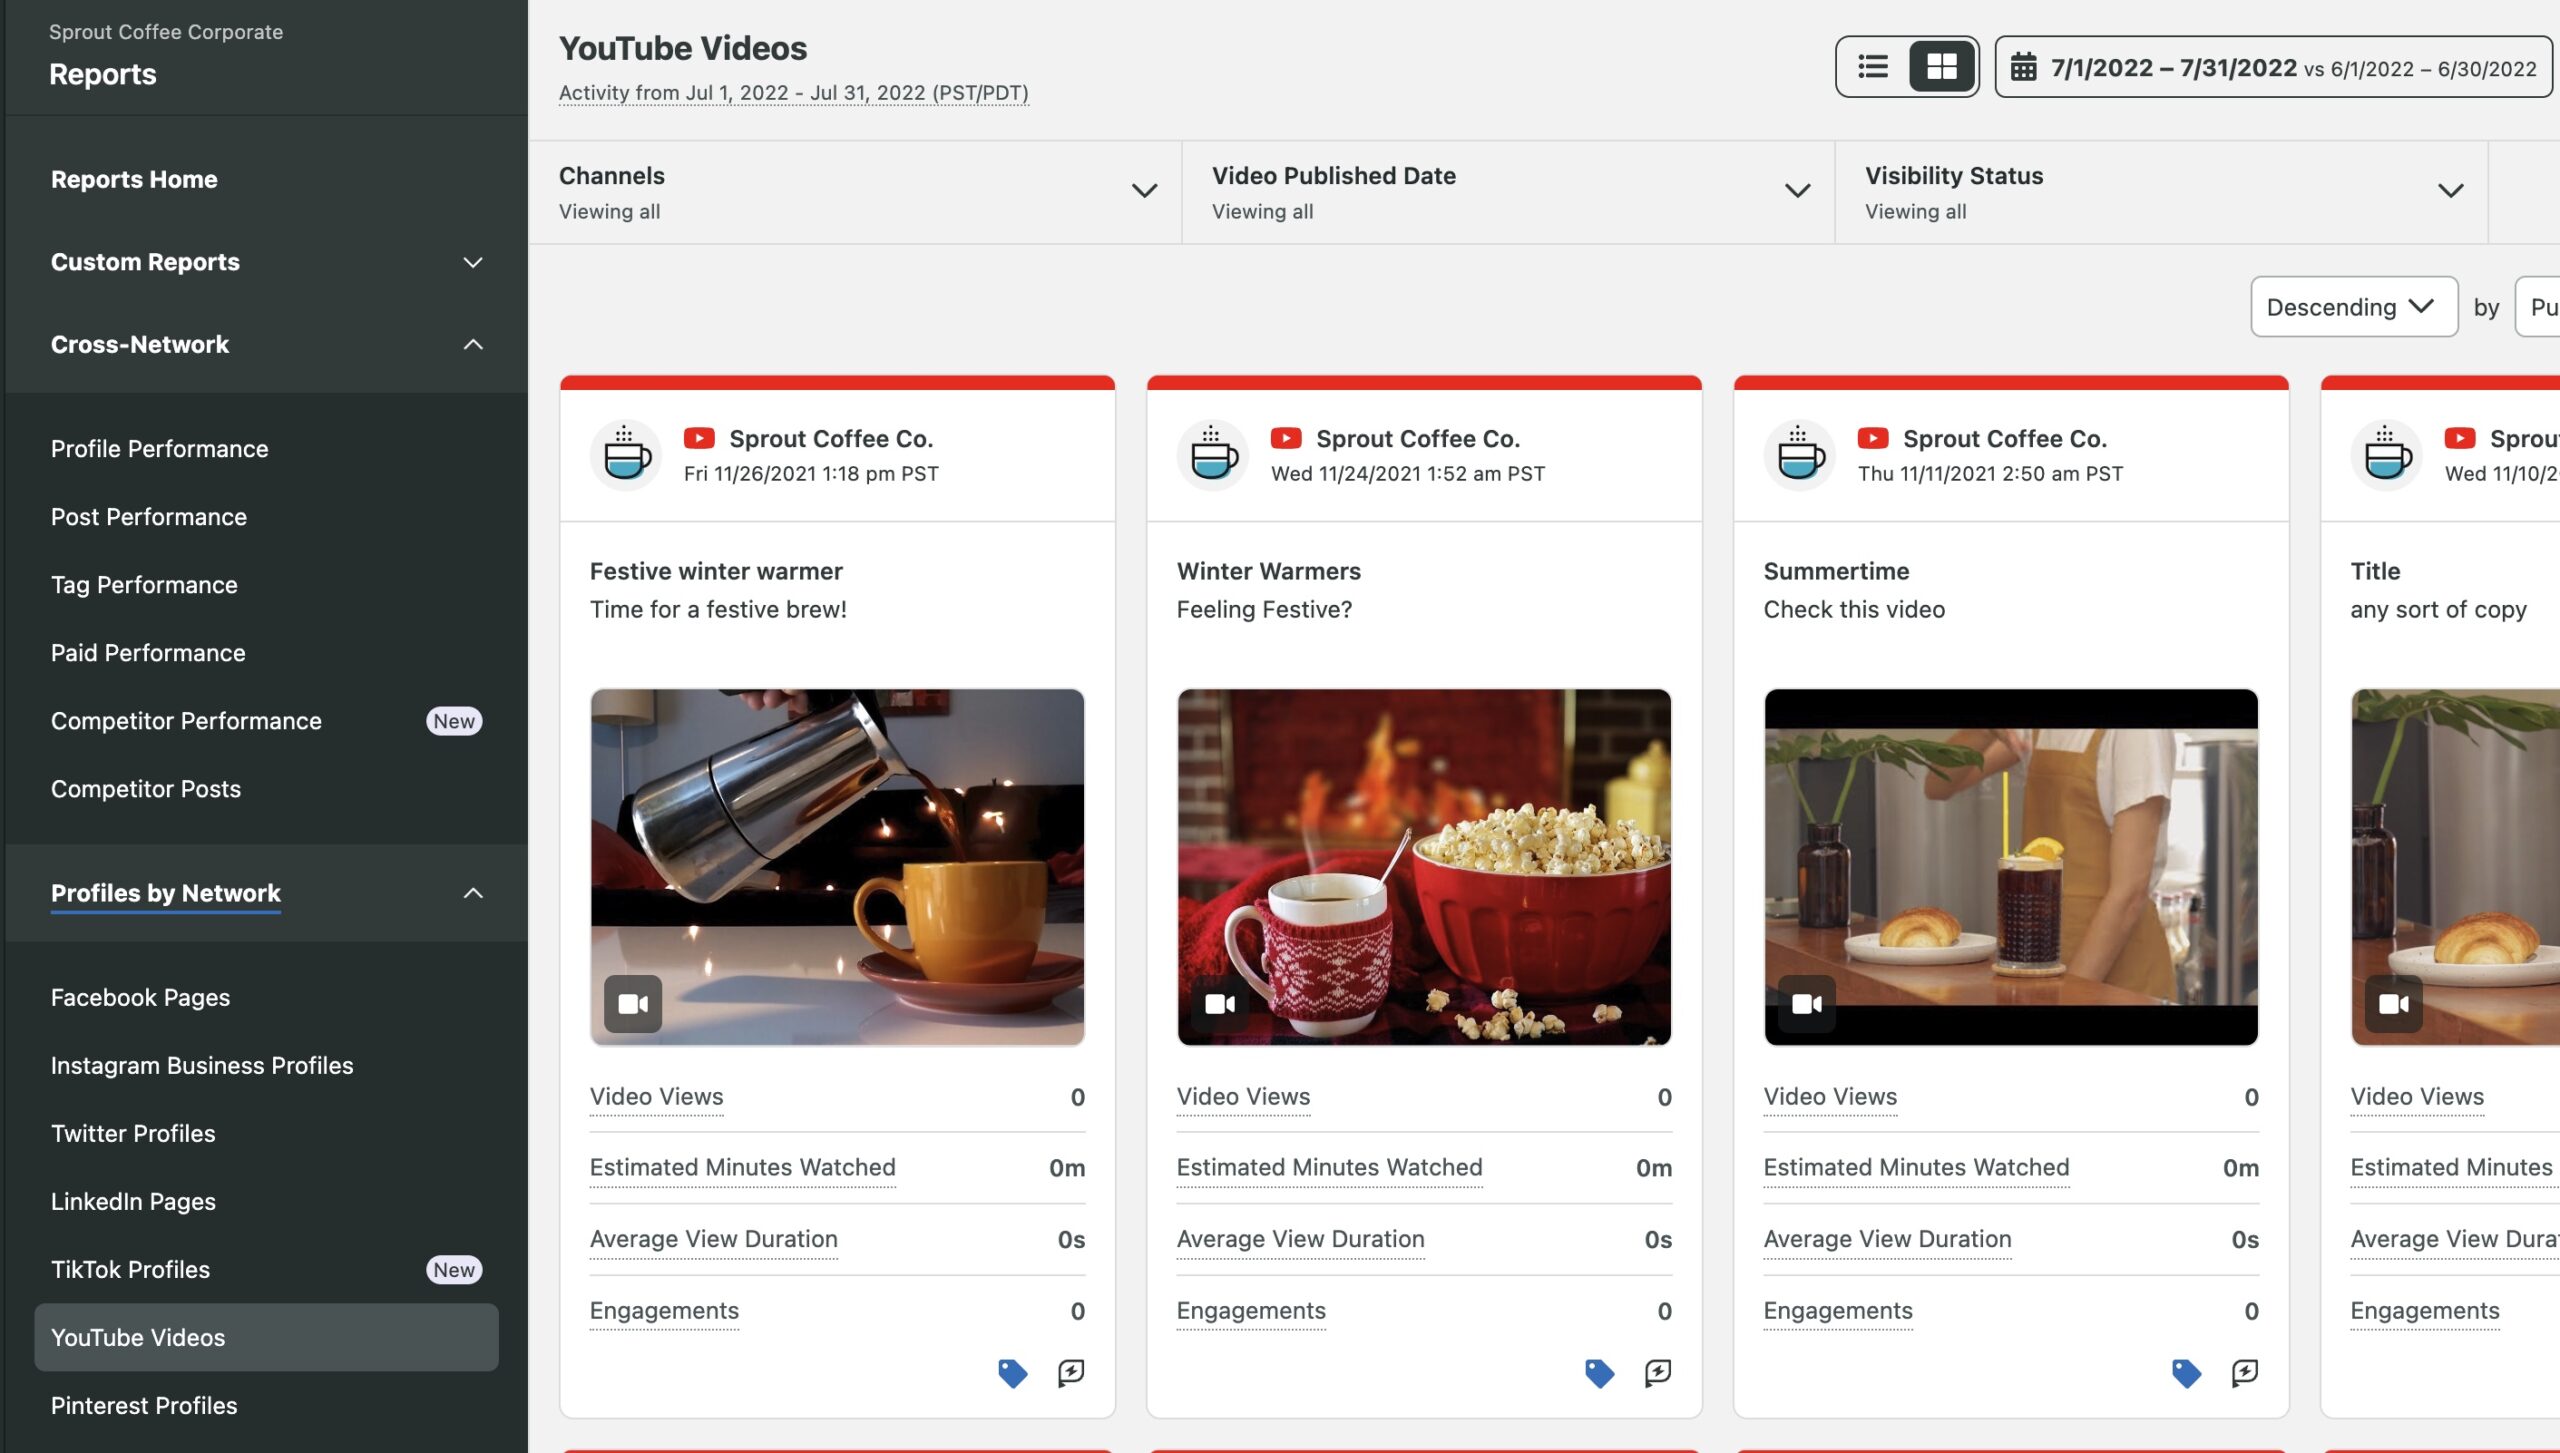 Sprout Social's YouTube Analytics dashboard